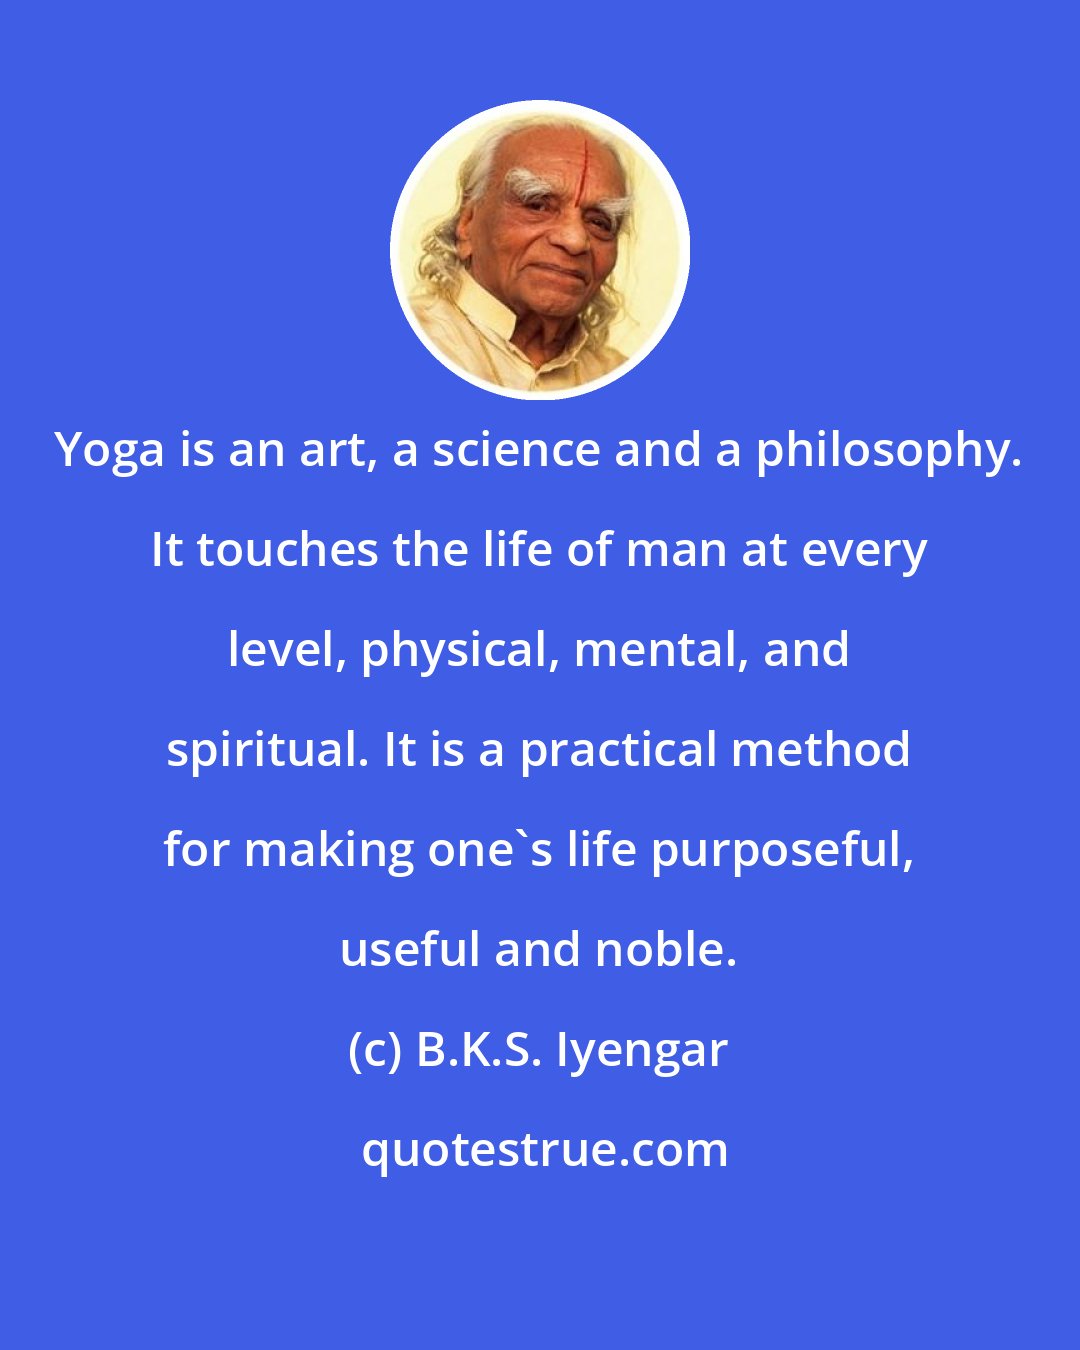 B.K.S. Iyengar: Yoga is an art, a science and a philosophy. It touches the life of man at every level, physical, mental, and spiritual. It is a practical method for making one's life purposeful, useful and noble.